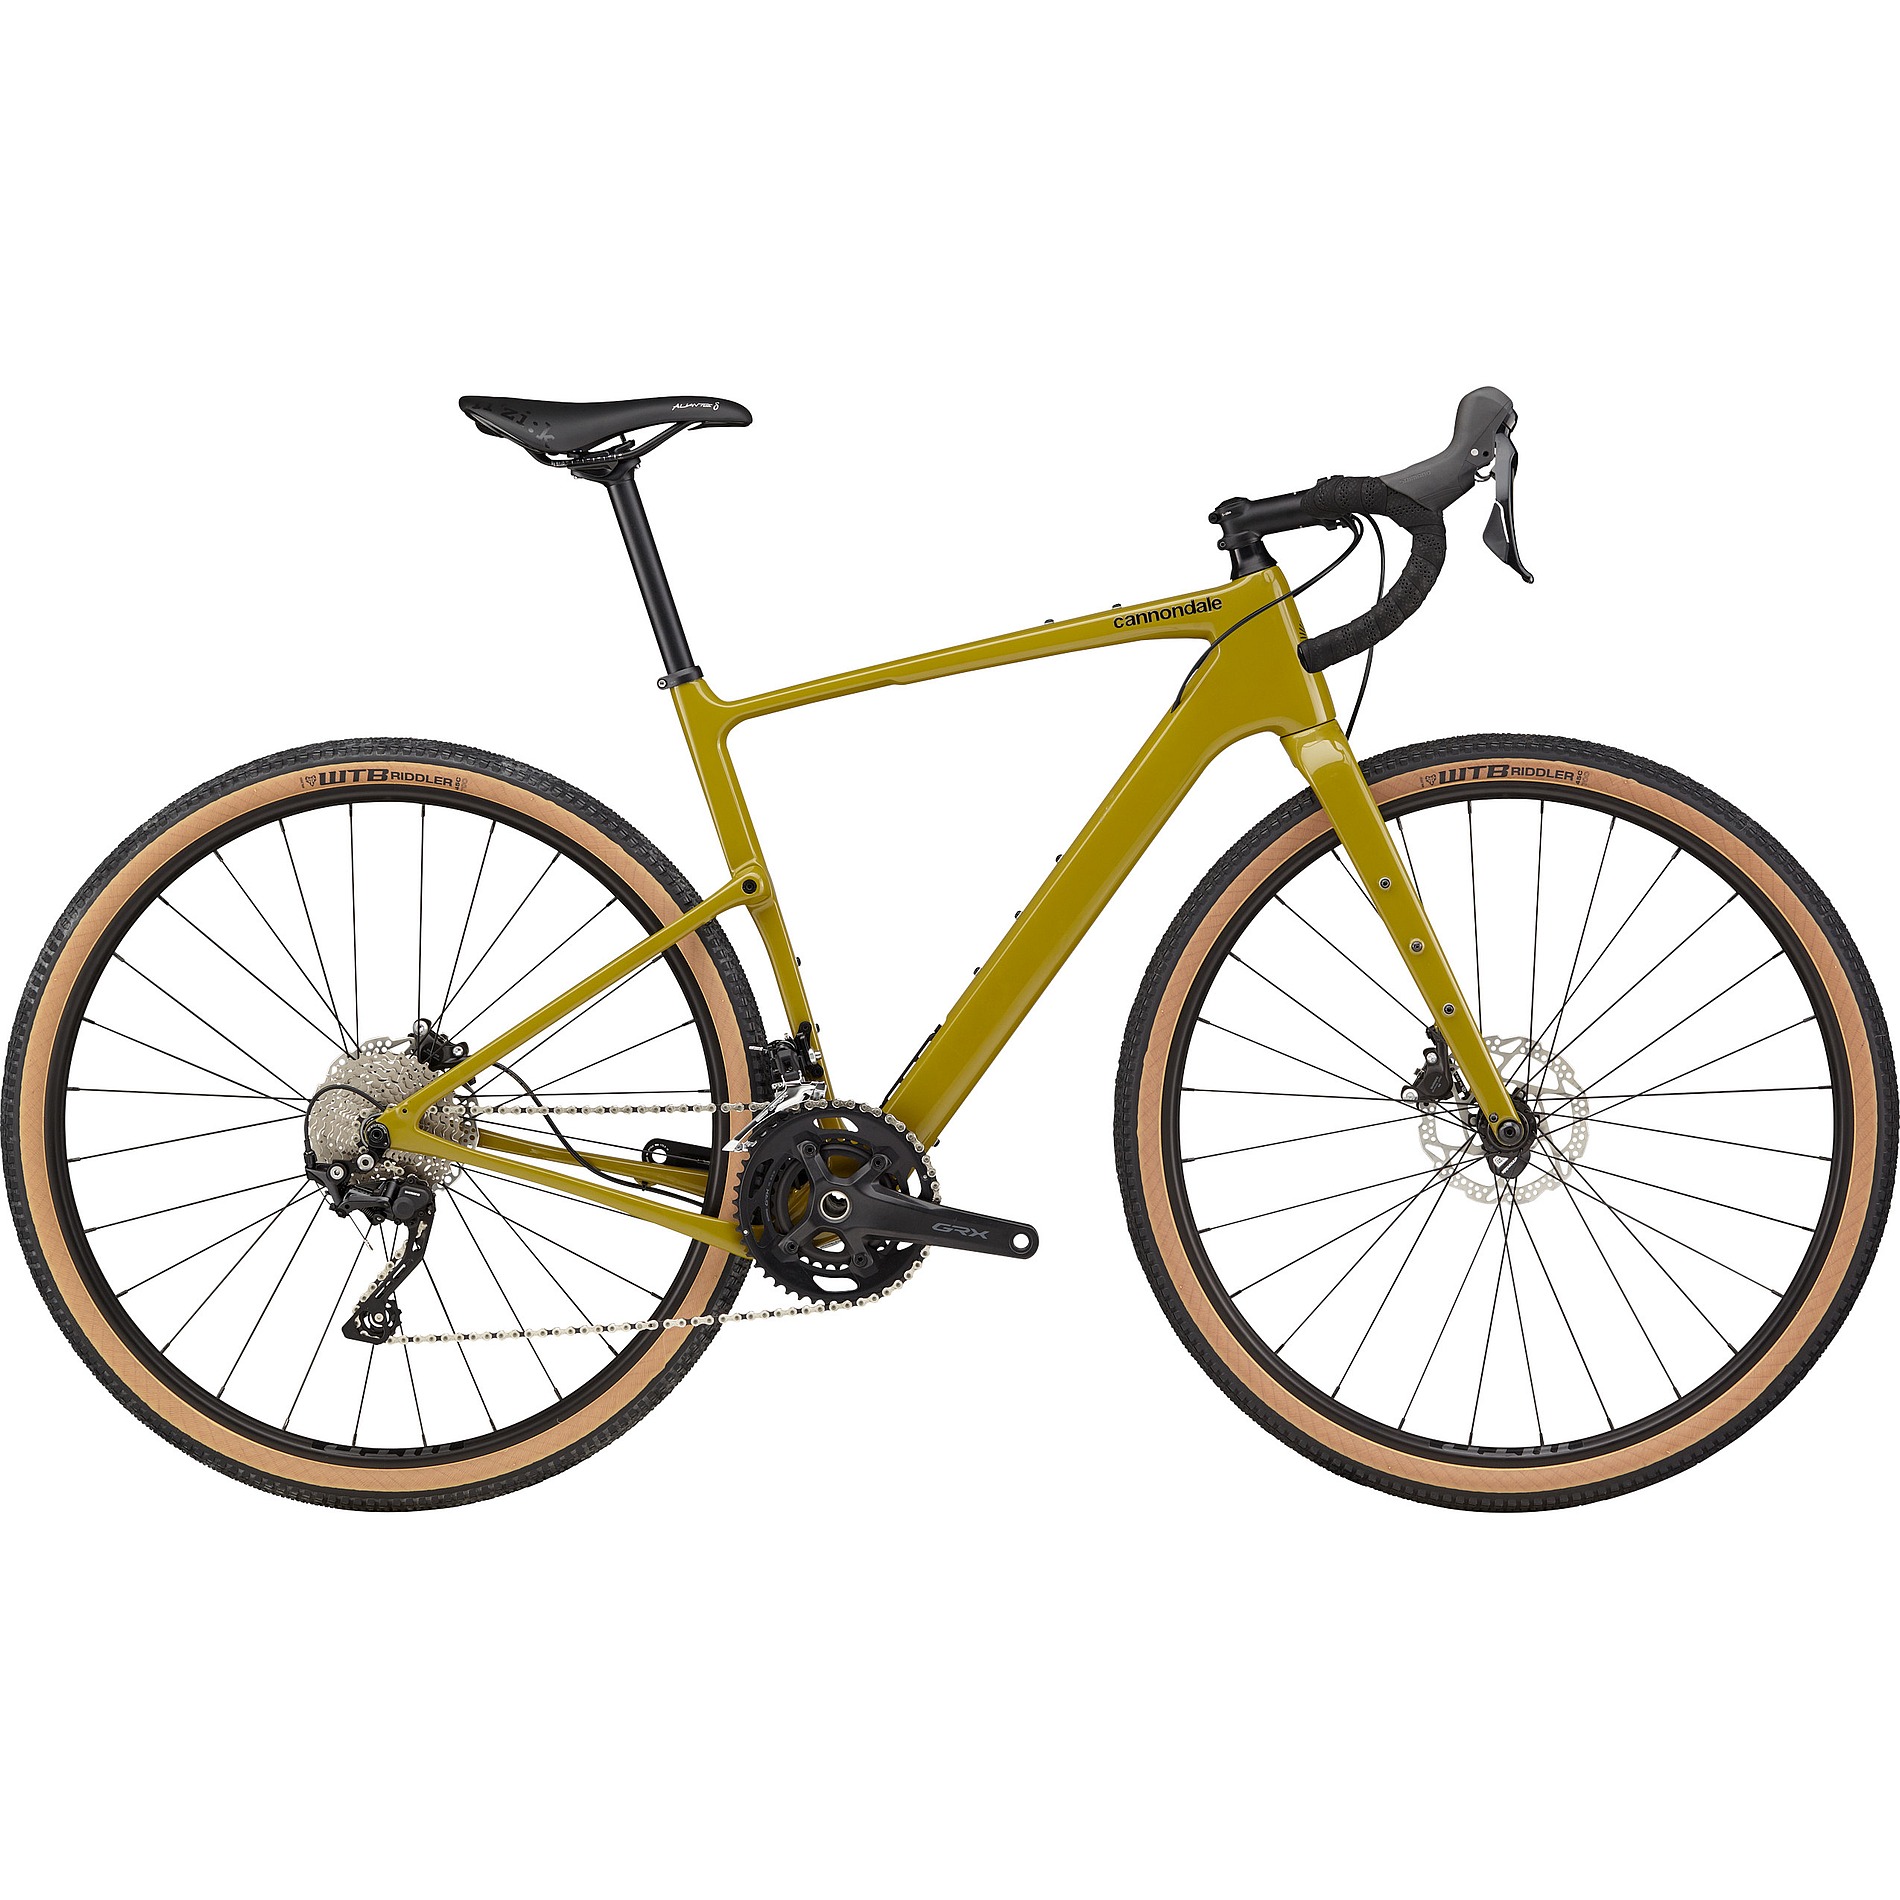 Productfoto van Cannondale TOPSTONE Carbon 4 - Shimano GRX - Gravelbike - 2023 - olive green